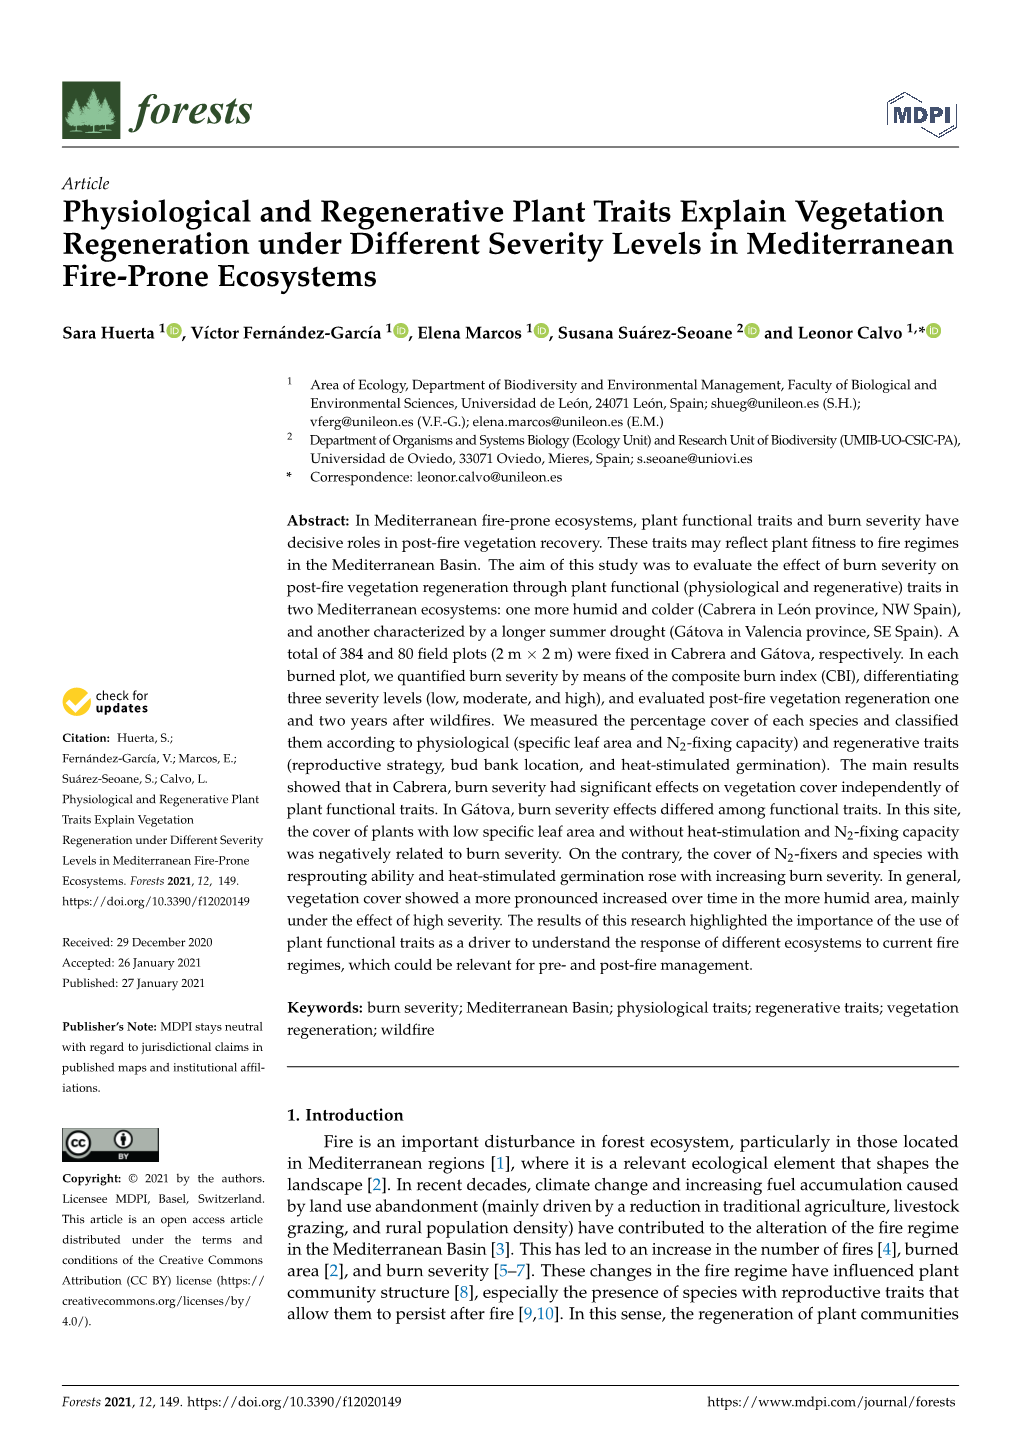 Physiological and Regenerative Plant Traits Explain Vegetation Regeneration Under Different Severity Levels in Mediterranean Fire-Prone Ecosystems